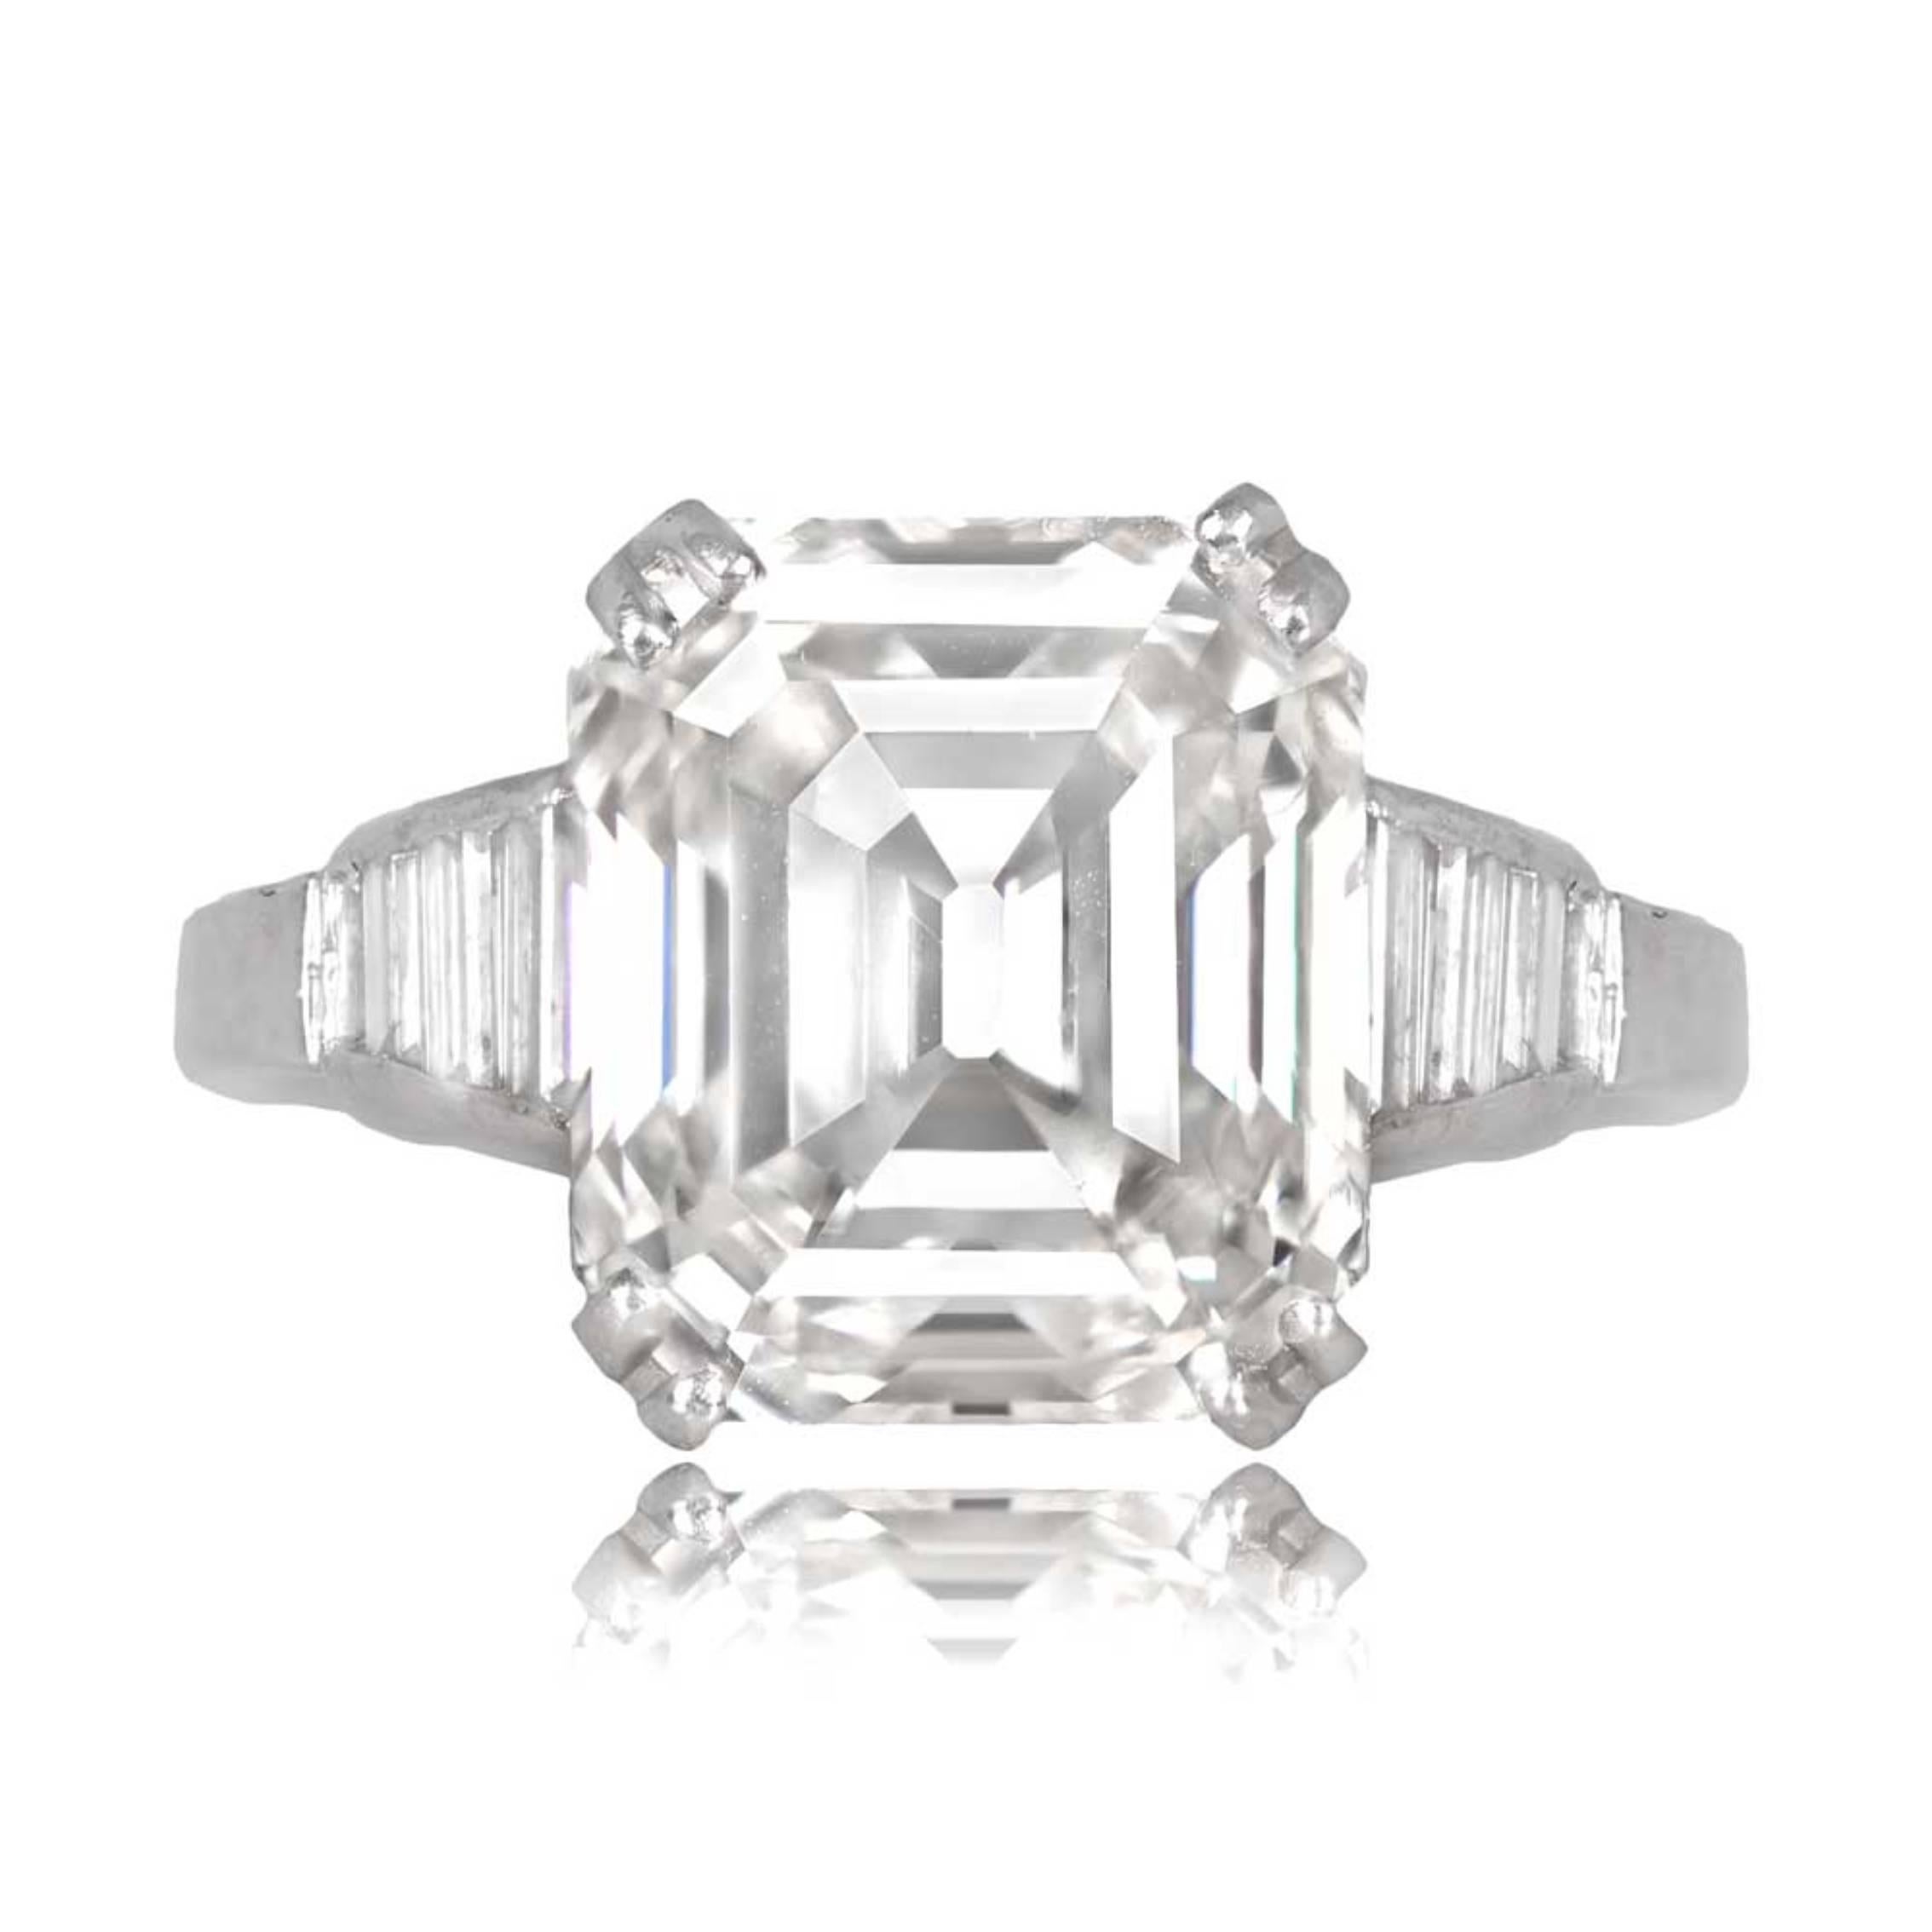 A platinum engagement ring with a GIA-certified 5.05-carat emerald-cut diamond (I color, VS1 clarity) set in prongs, accented by calibrated baguette-cut diamonds on the shoulders.

Ring Size: 6.5 US, Resizable
Certification: GIA Certificate
Color: I